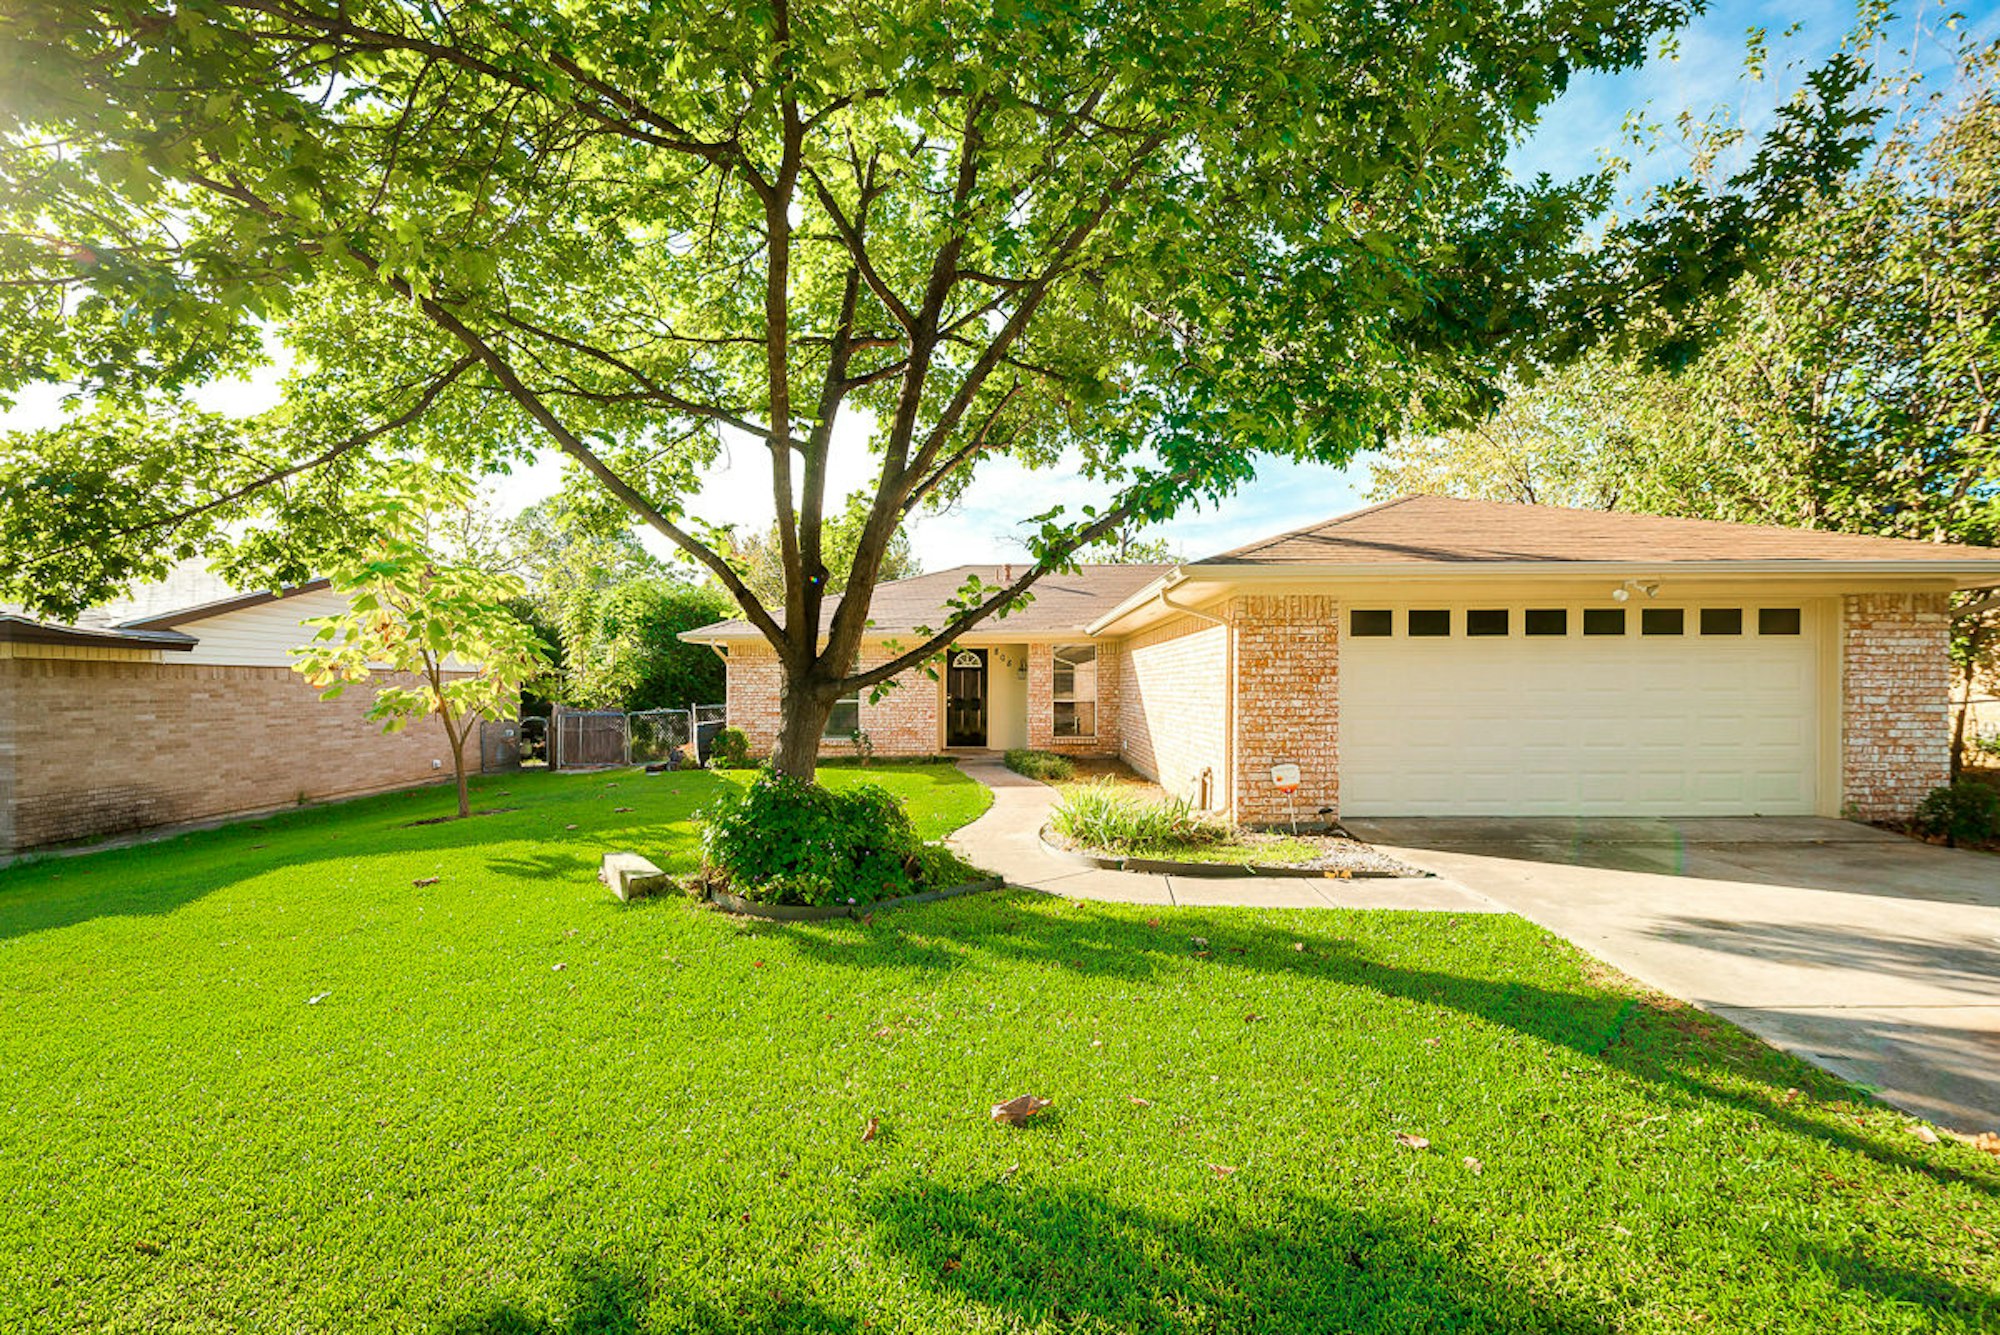 Photo 1 of 25 - 808 S Atkerson Ln, Euless, TX 76040